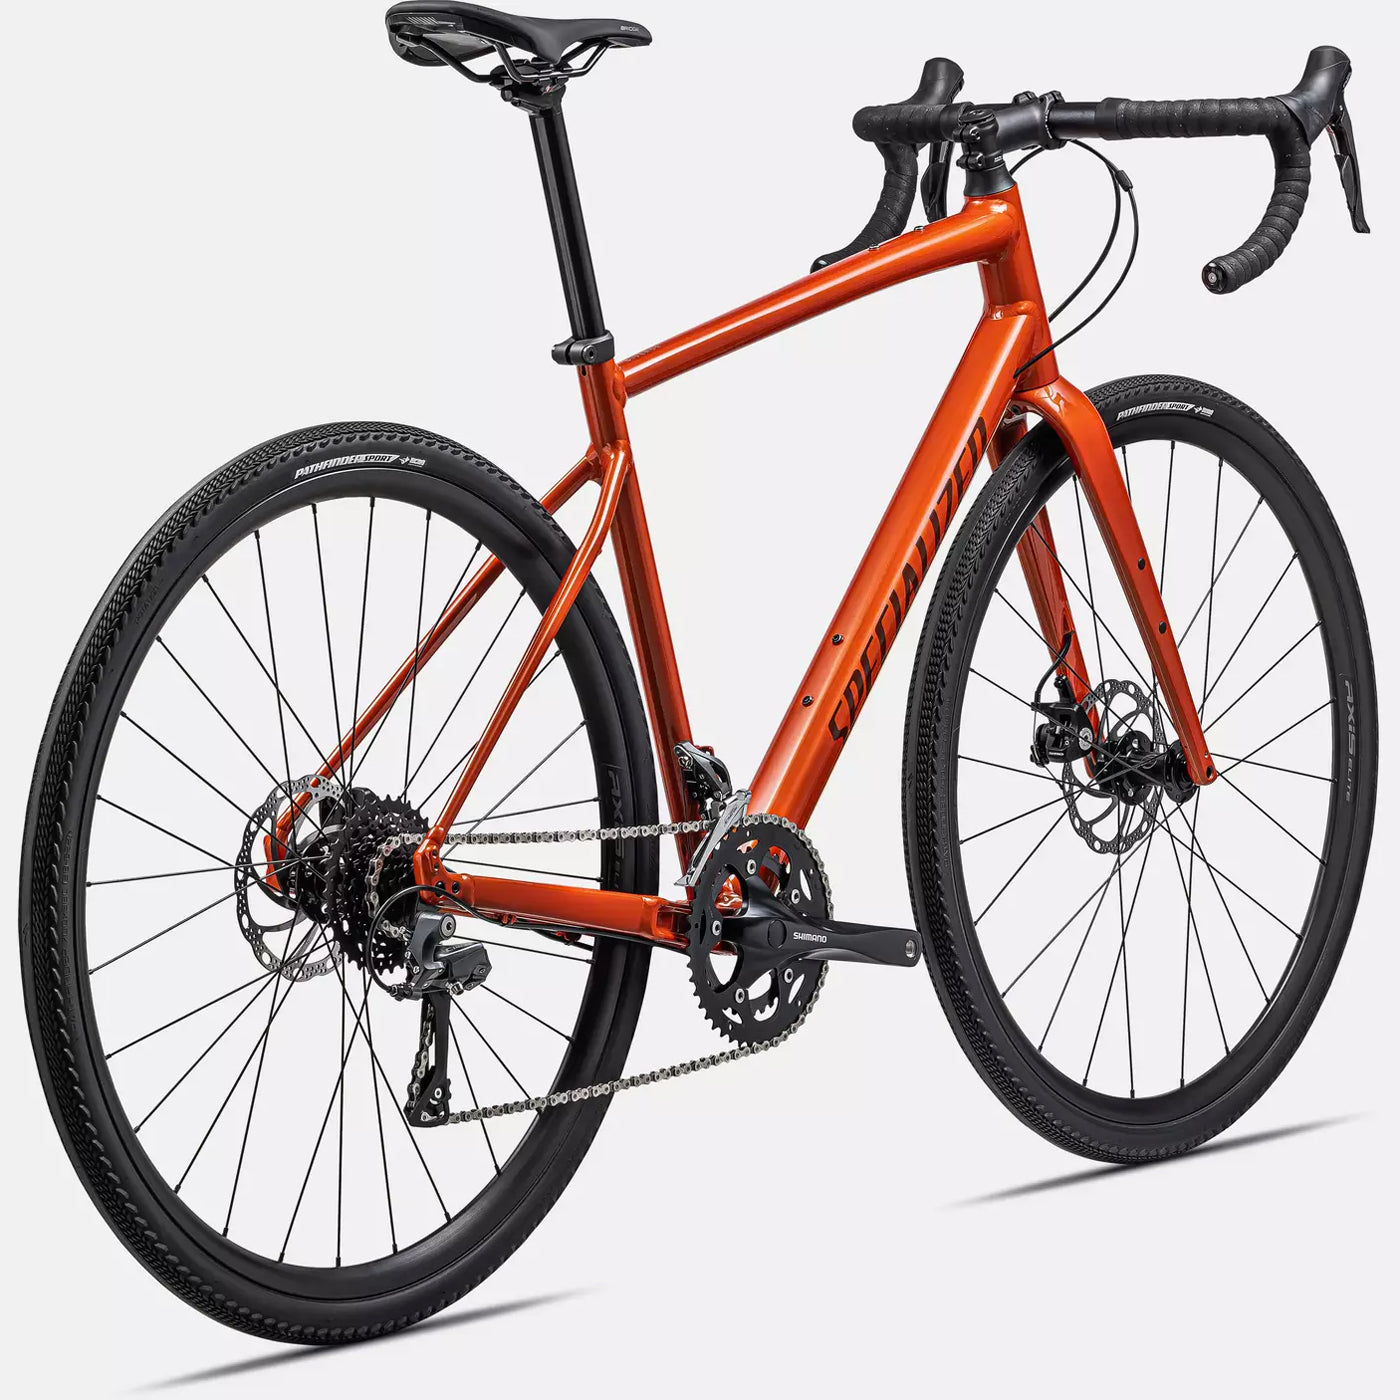 Specialized Diverge E5 - Rot